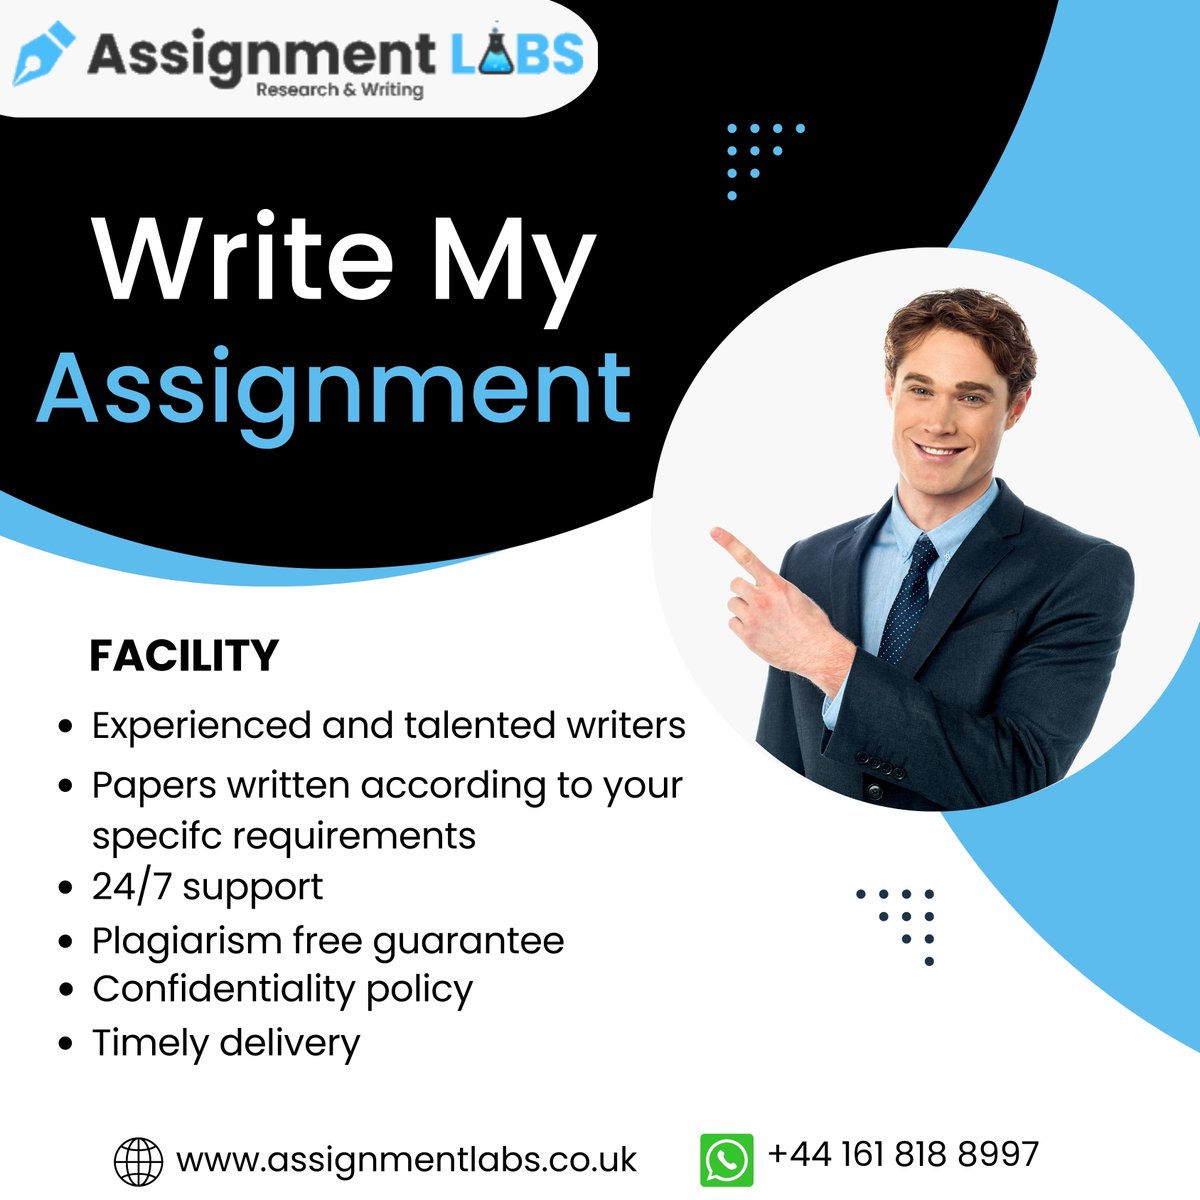 Assignment Labs  will write your assignments and deliver them on time.
#assignmentwriting #writemyassignment #domyassignments
Website: bit.ly/assignmentlabs…
📞+44 161 818 8997
📧info@assignmentlabs.co.uk